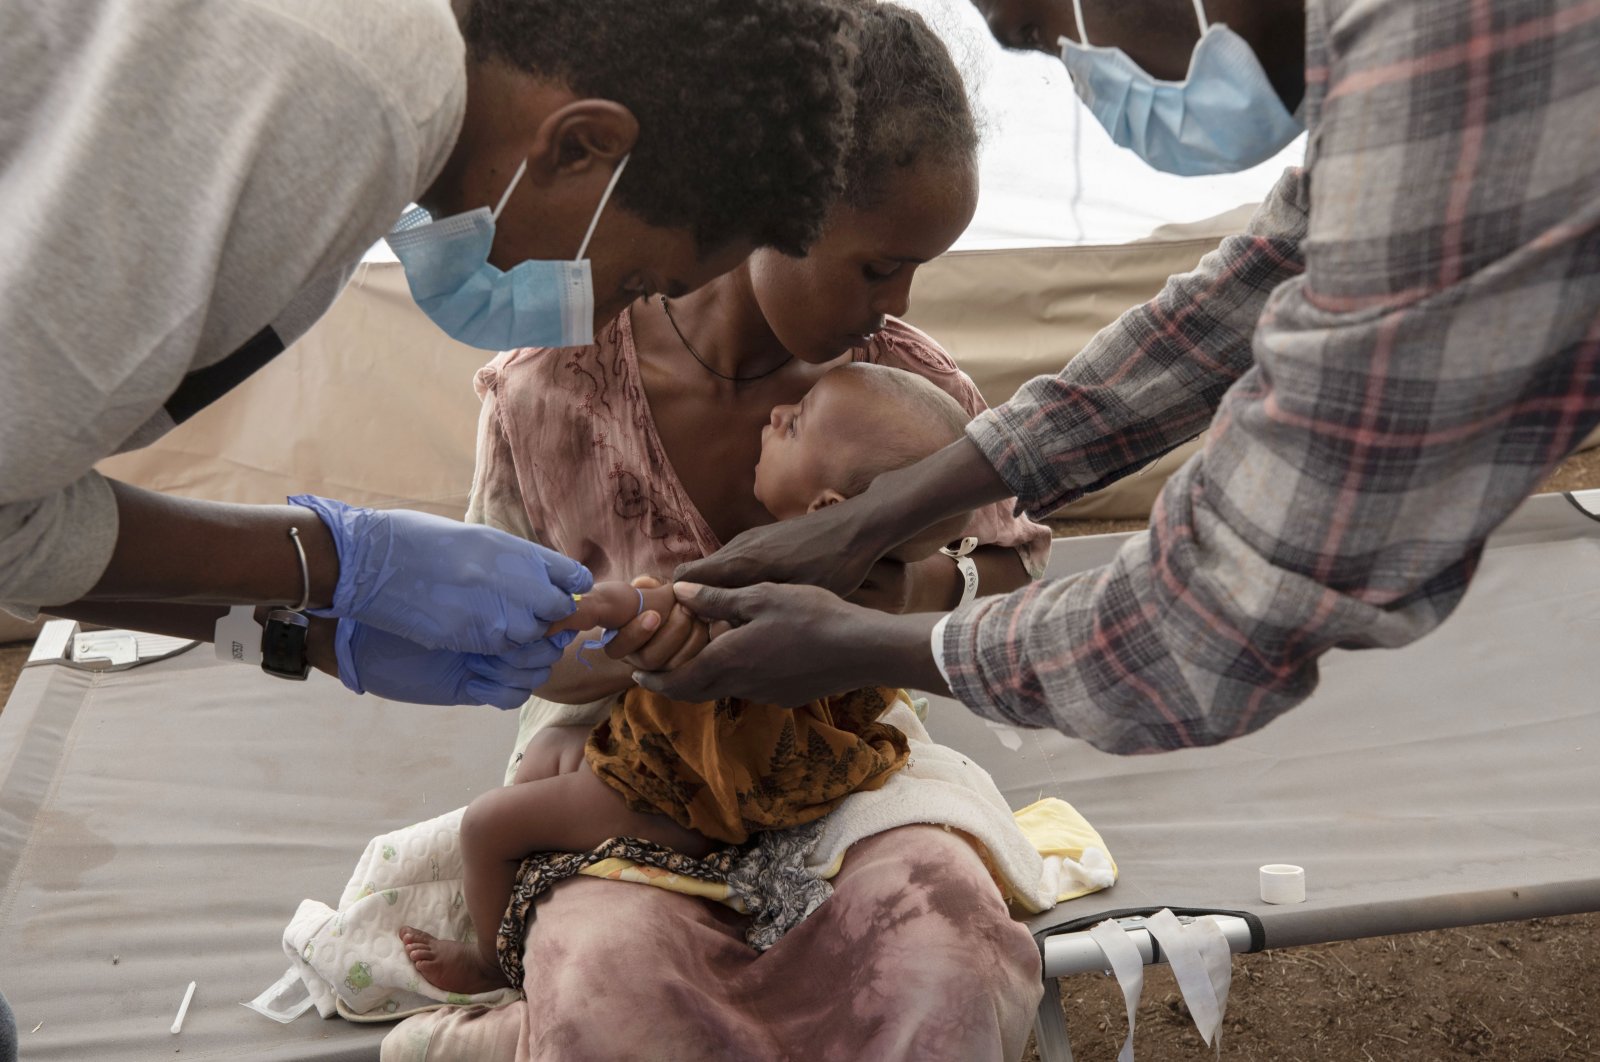 A Tigray woman who fled the conflict in Ethiopia's Tigray region, holds her malnourished and severely dehydrated baby as nurses give him IV fluids, at the Medecins Sans Frontieres (MSF) clinic, at Umm Rakouba refugee camp in Qadarif, eastern Sudan, Dec. 5, 2020. (AP Photo)